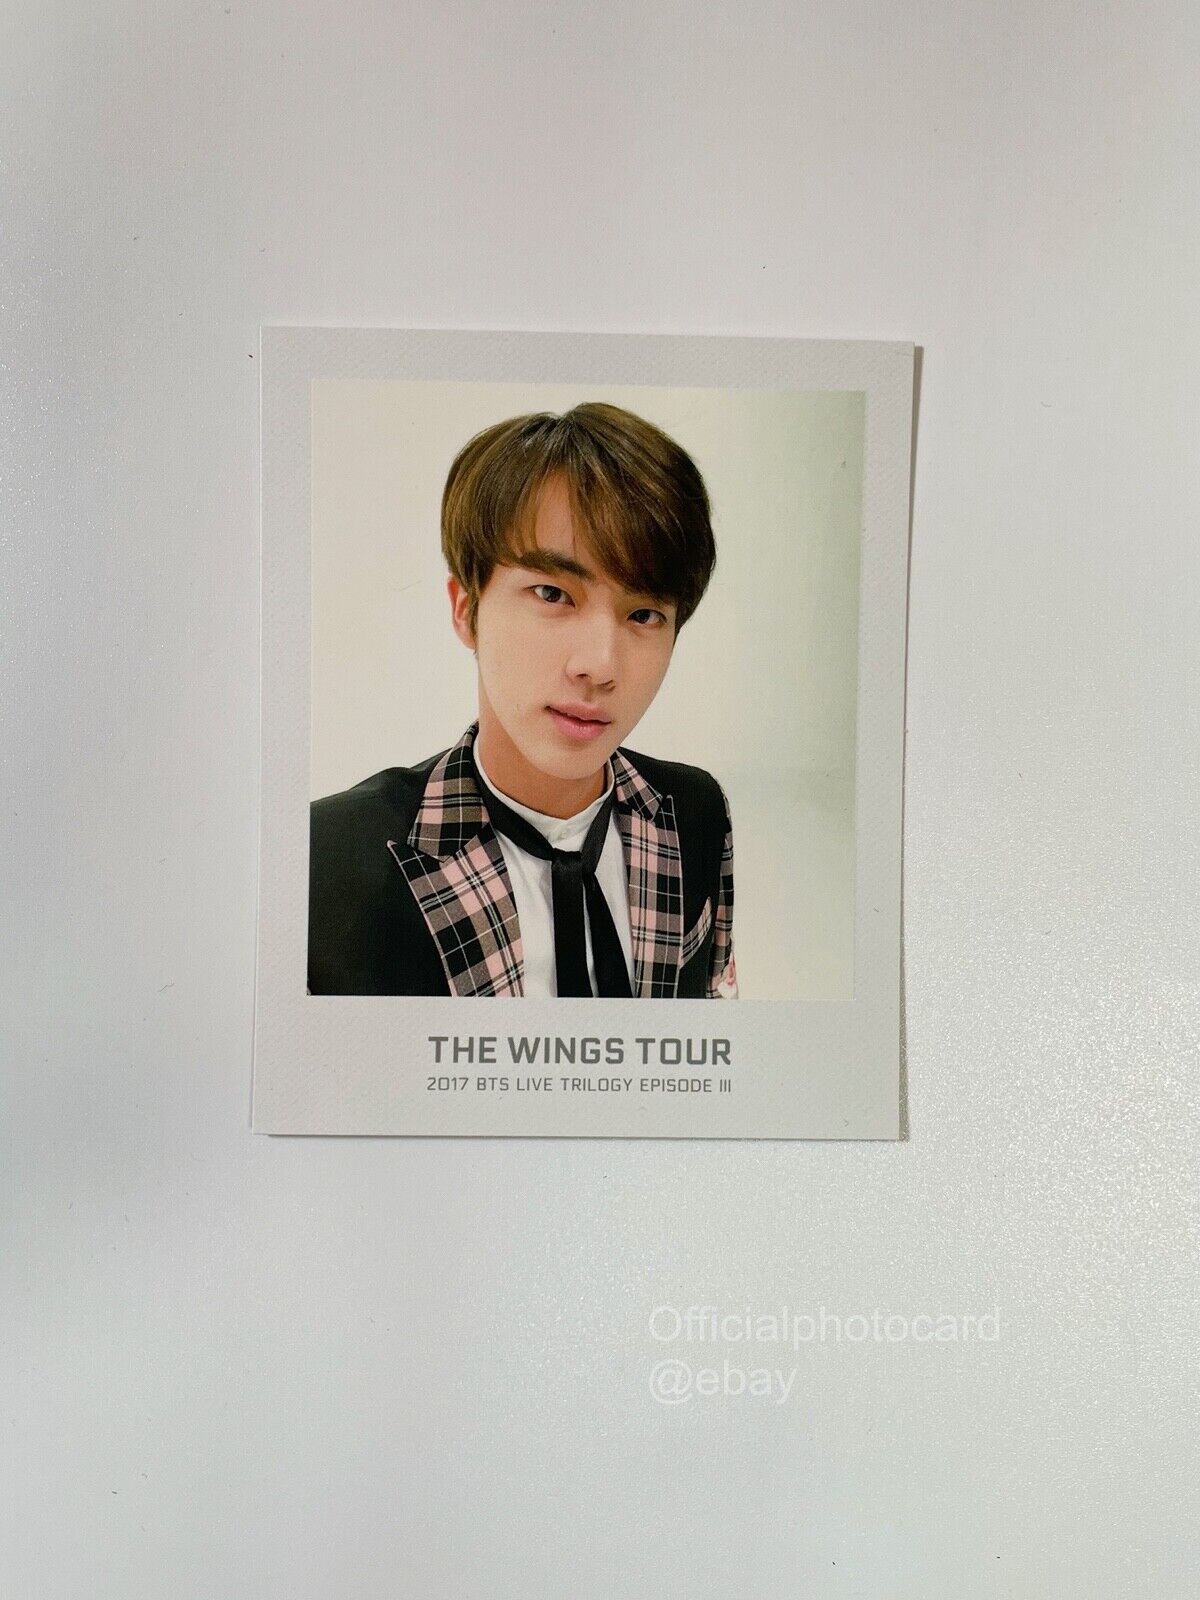 BTS THE WINGS TOUR 2017 Ticket Album Official Photocards Select Member